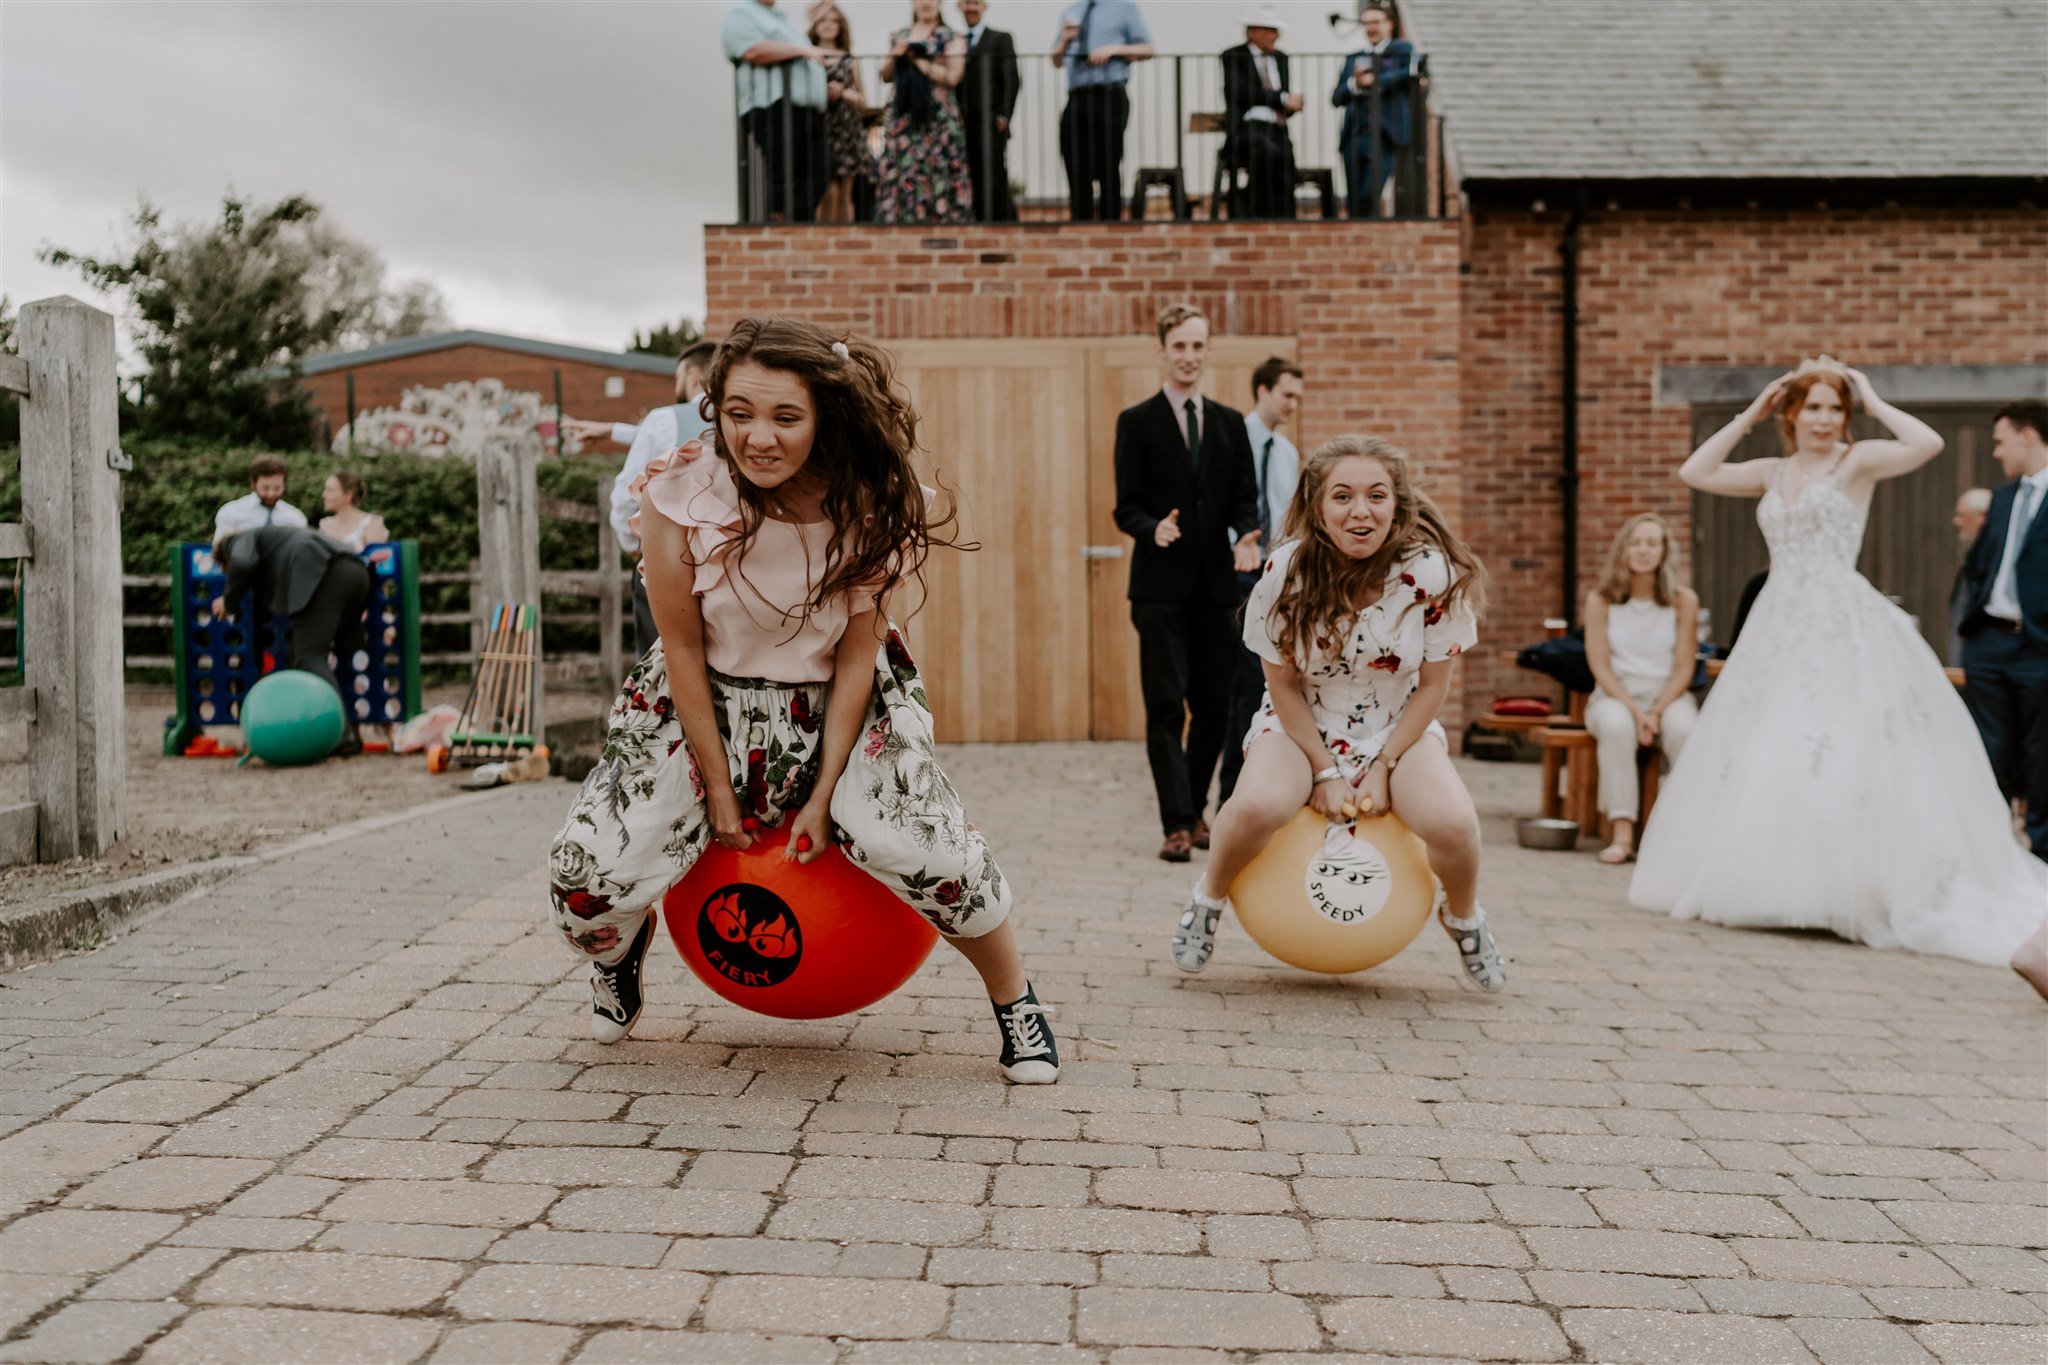 wedding guests space hopper jumping Stamford wedding photographer